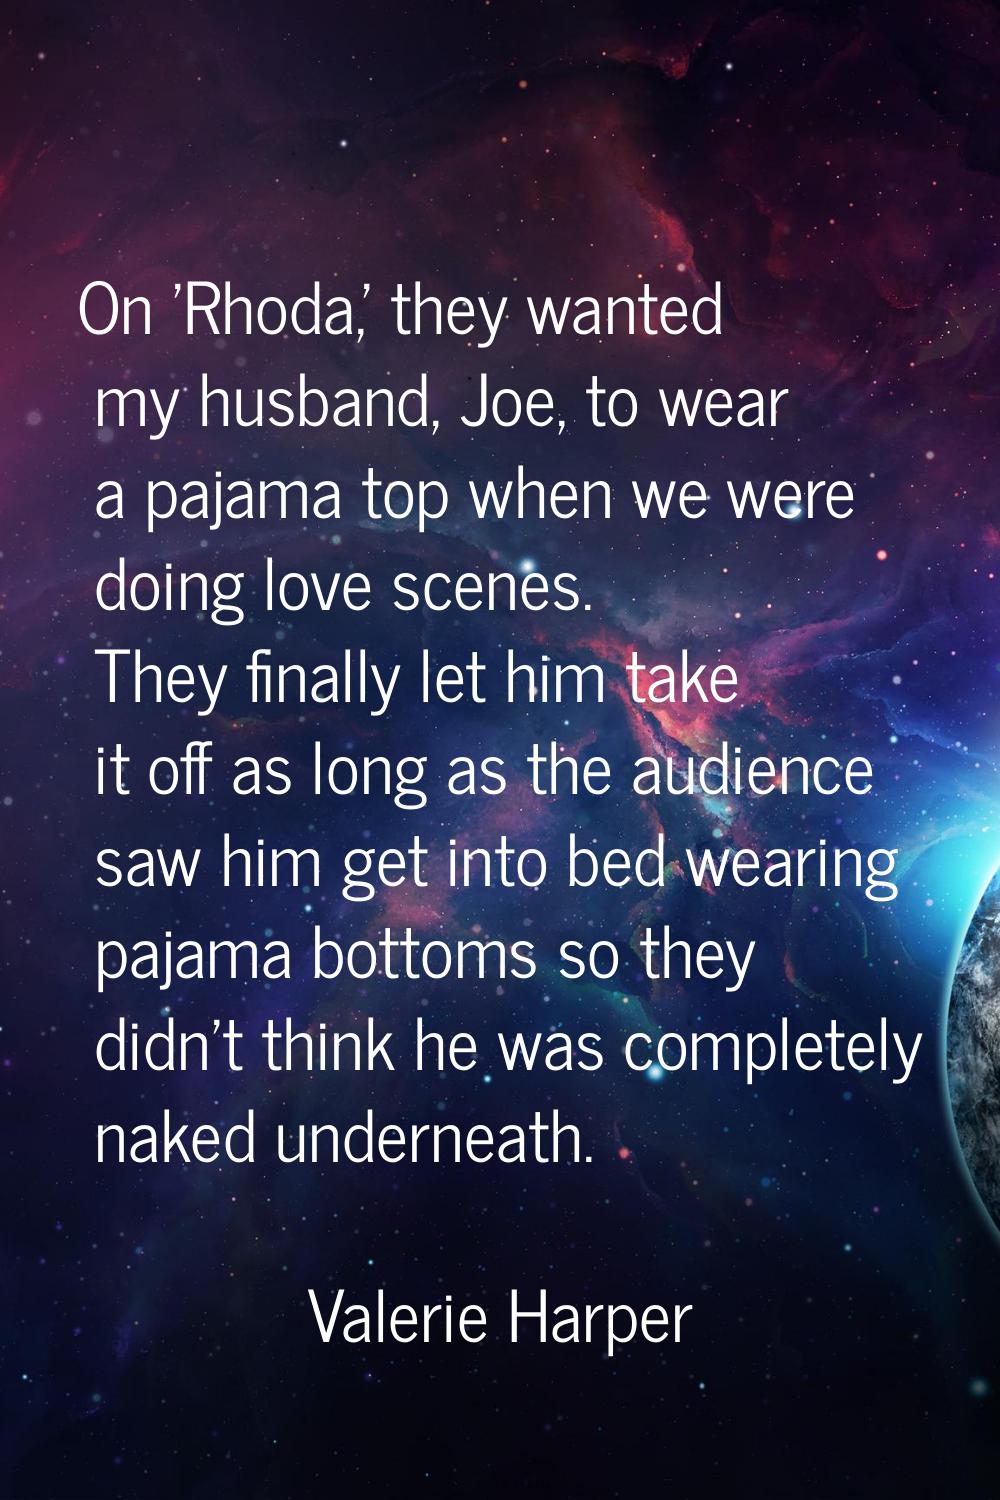 On 'Rhoda,' they wanted my husband, Joe, to wear a pajama top when we were doing love scenes. They 